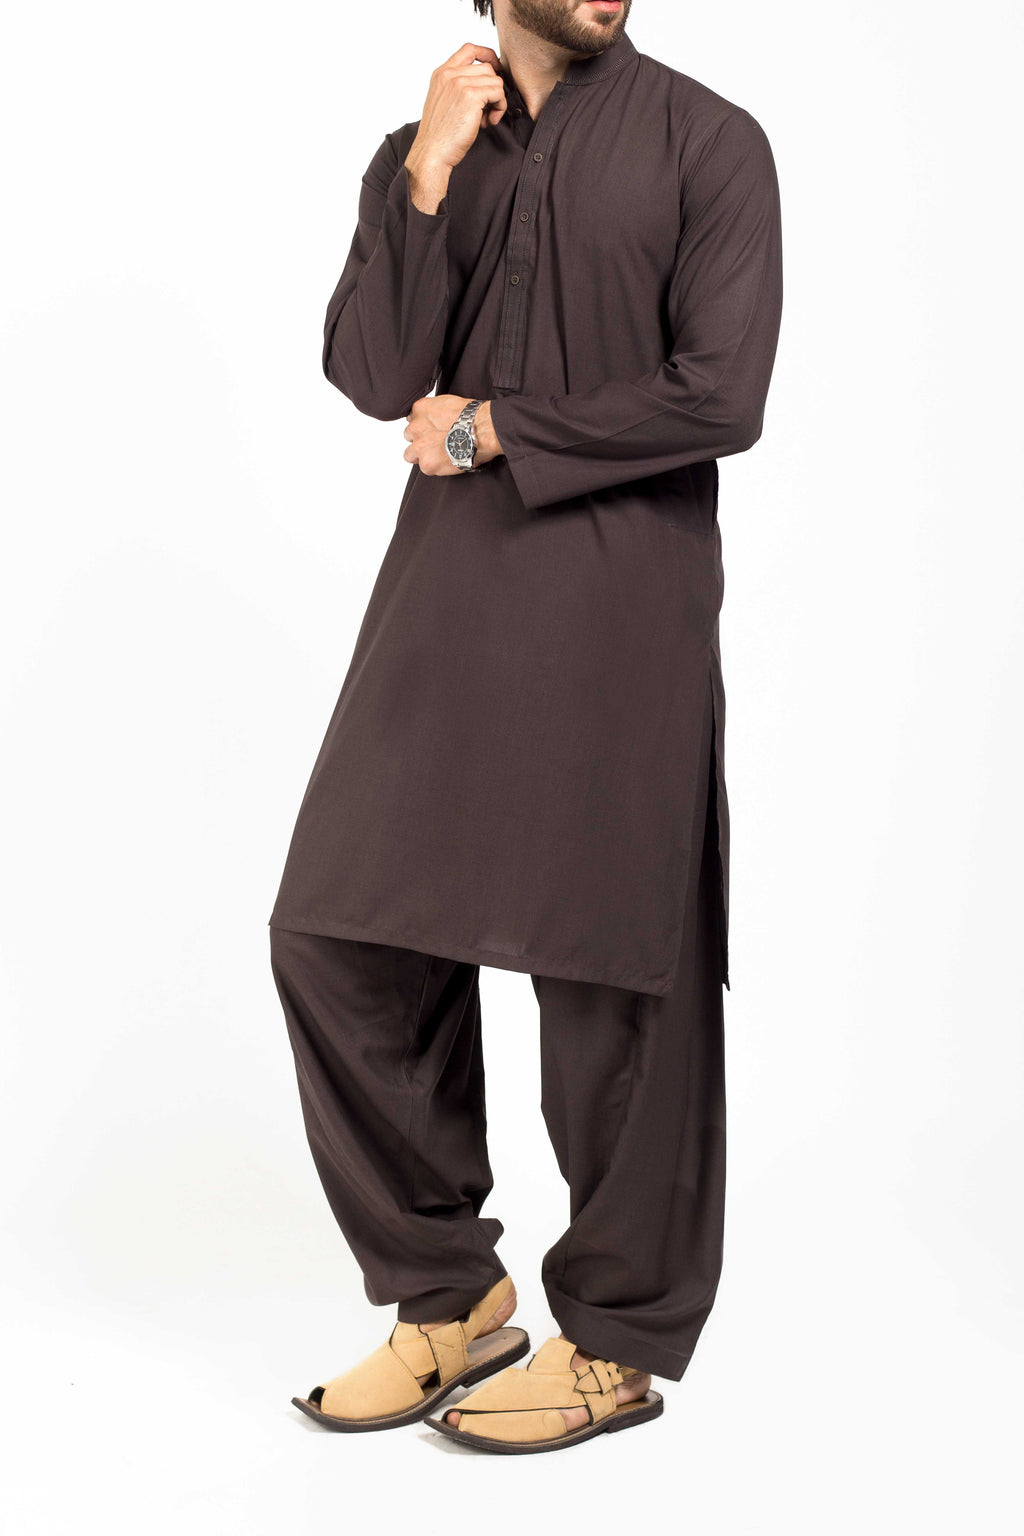 Image of   in Charcoal SKU: RQ-39133-Large-Charcoal